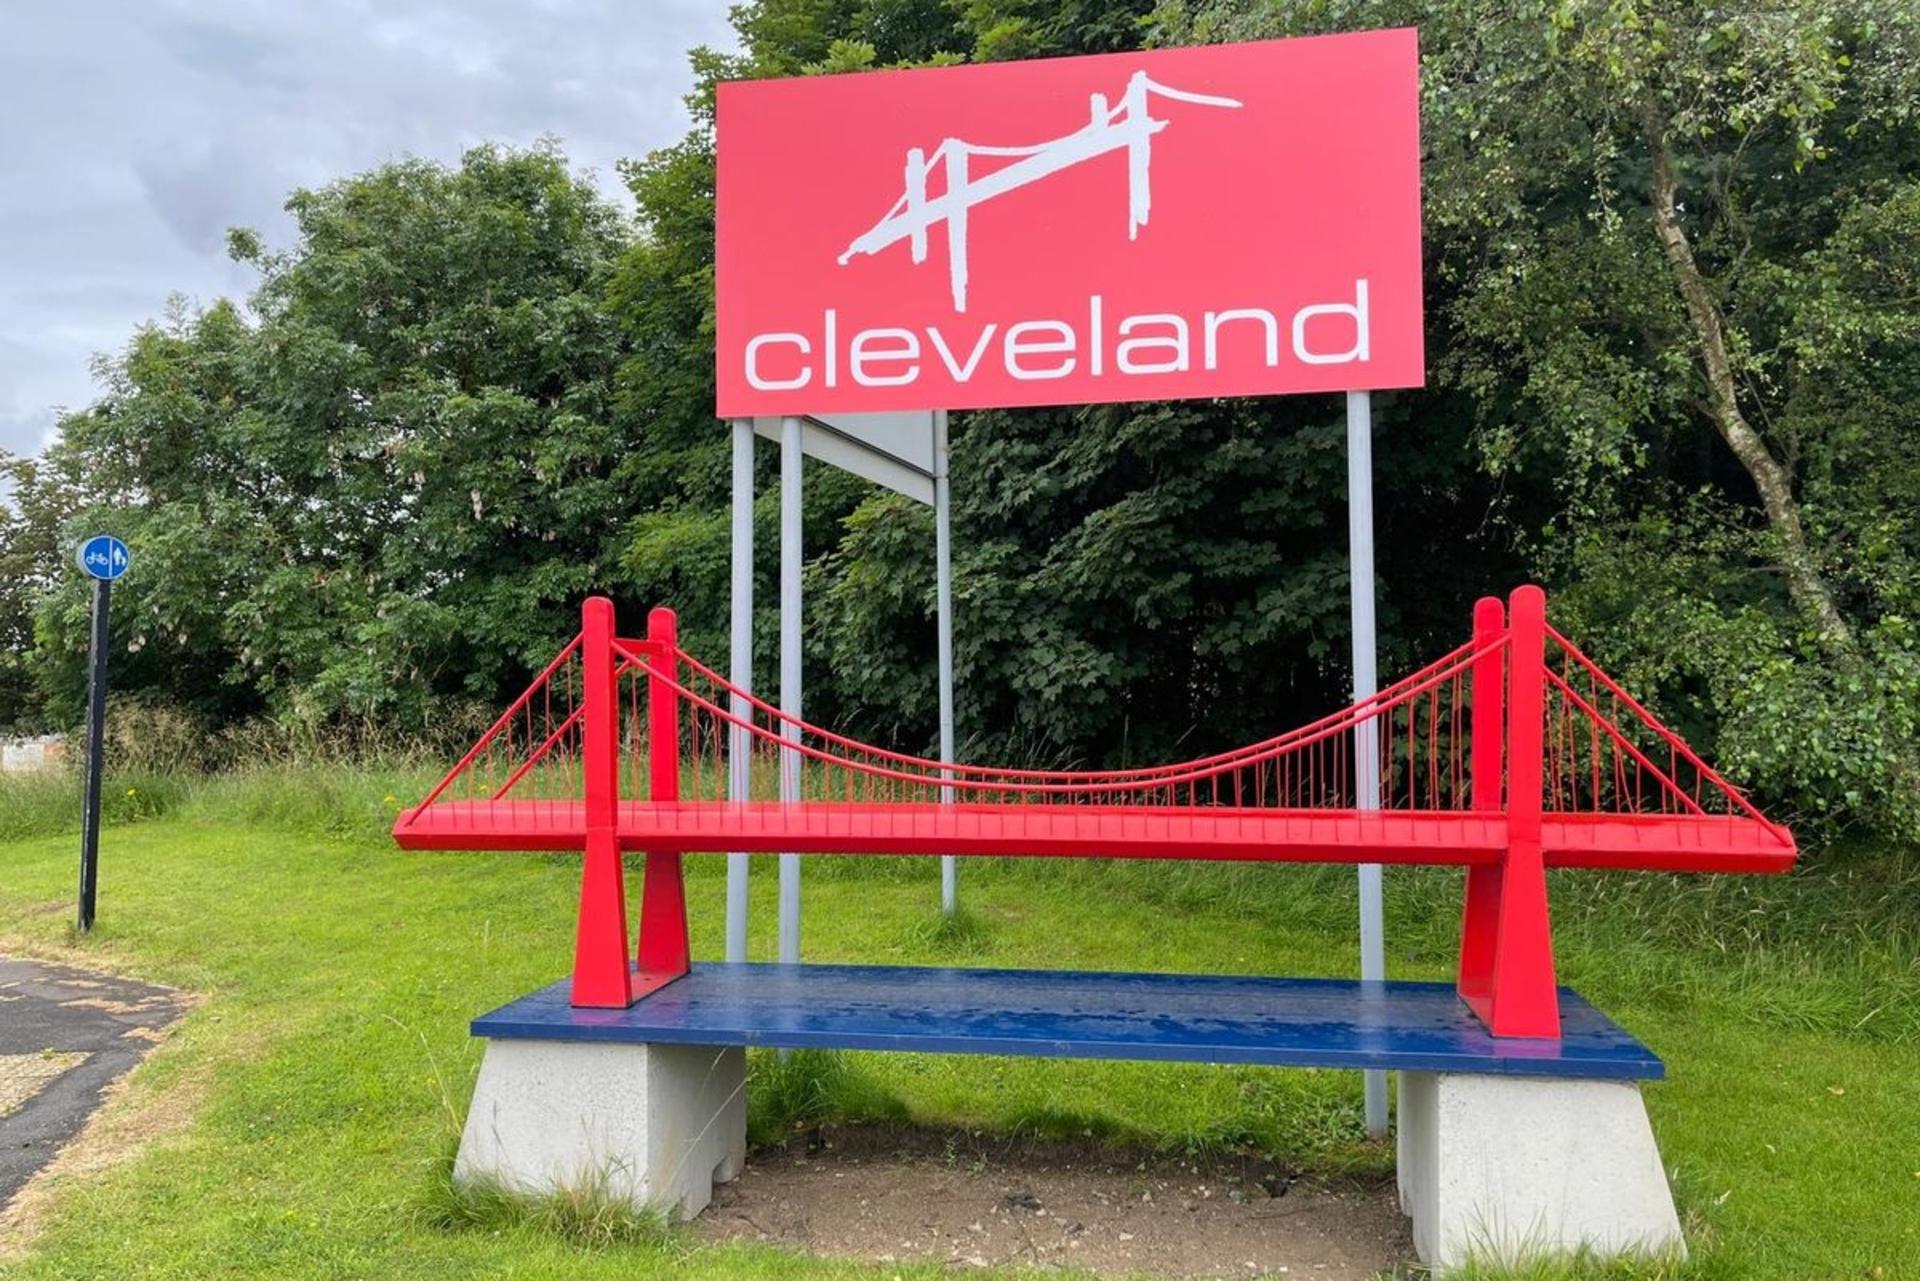 Cleveland Bridge property and assets to head to auction as search for a buyer fails